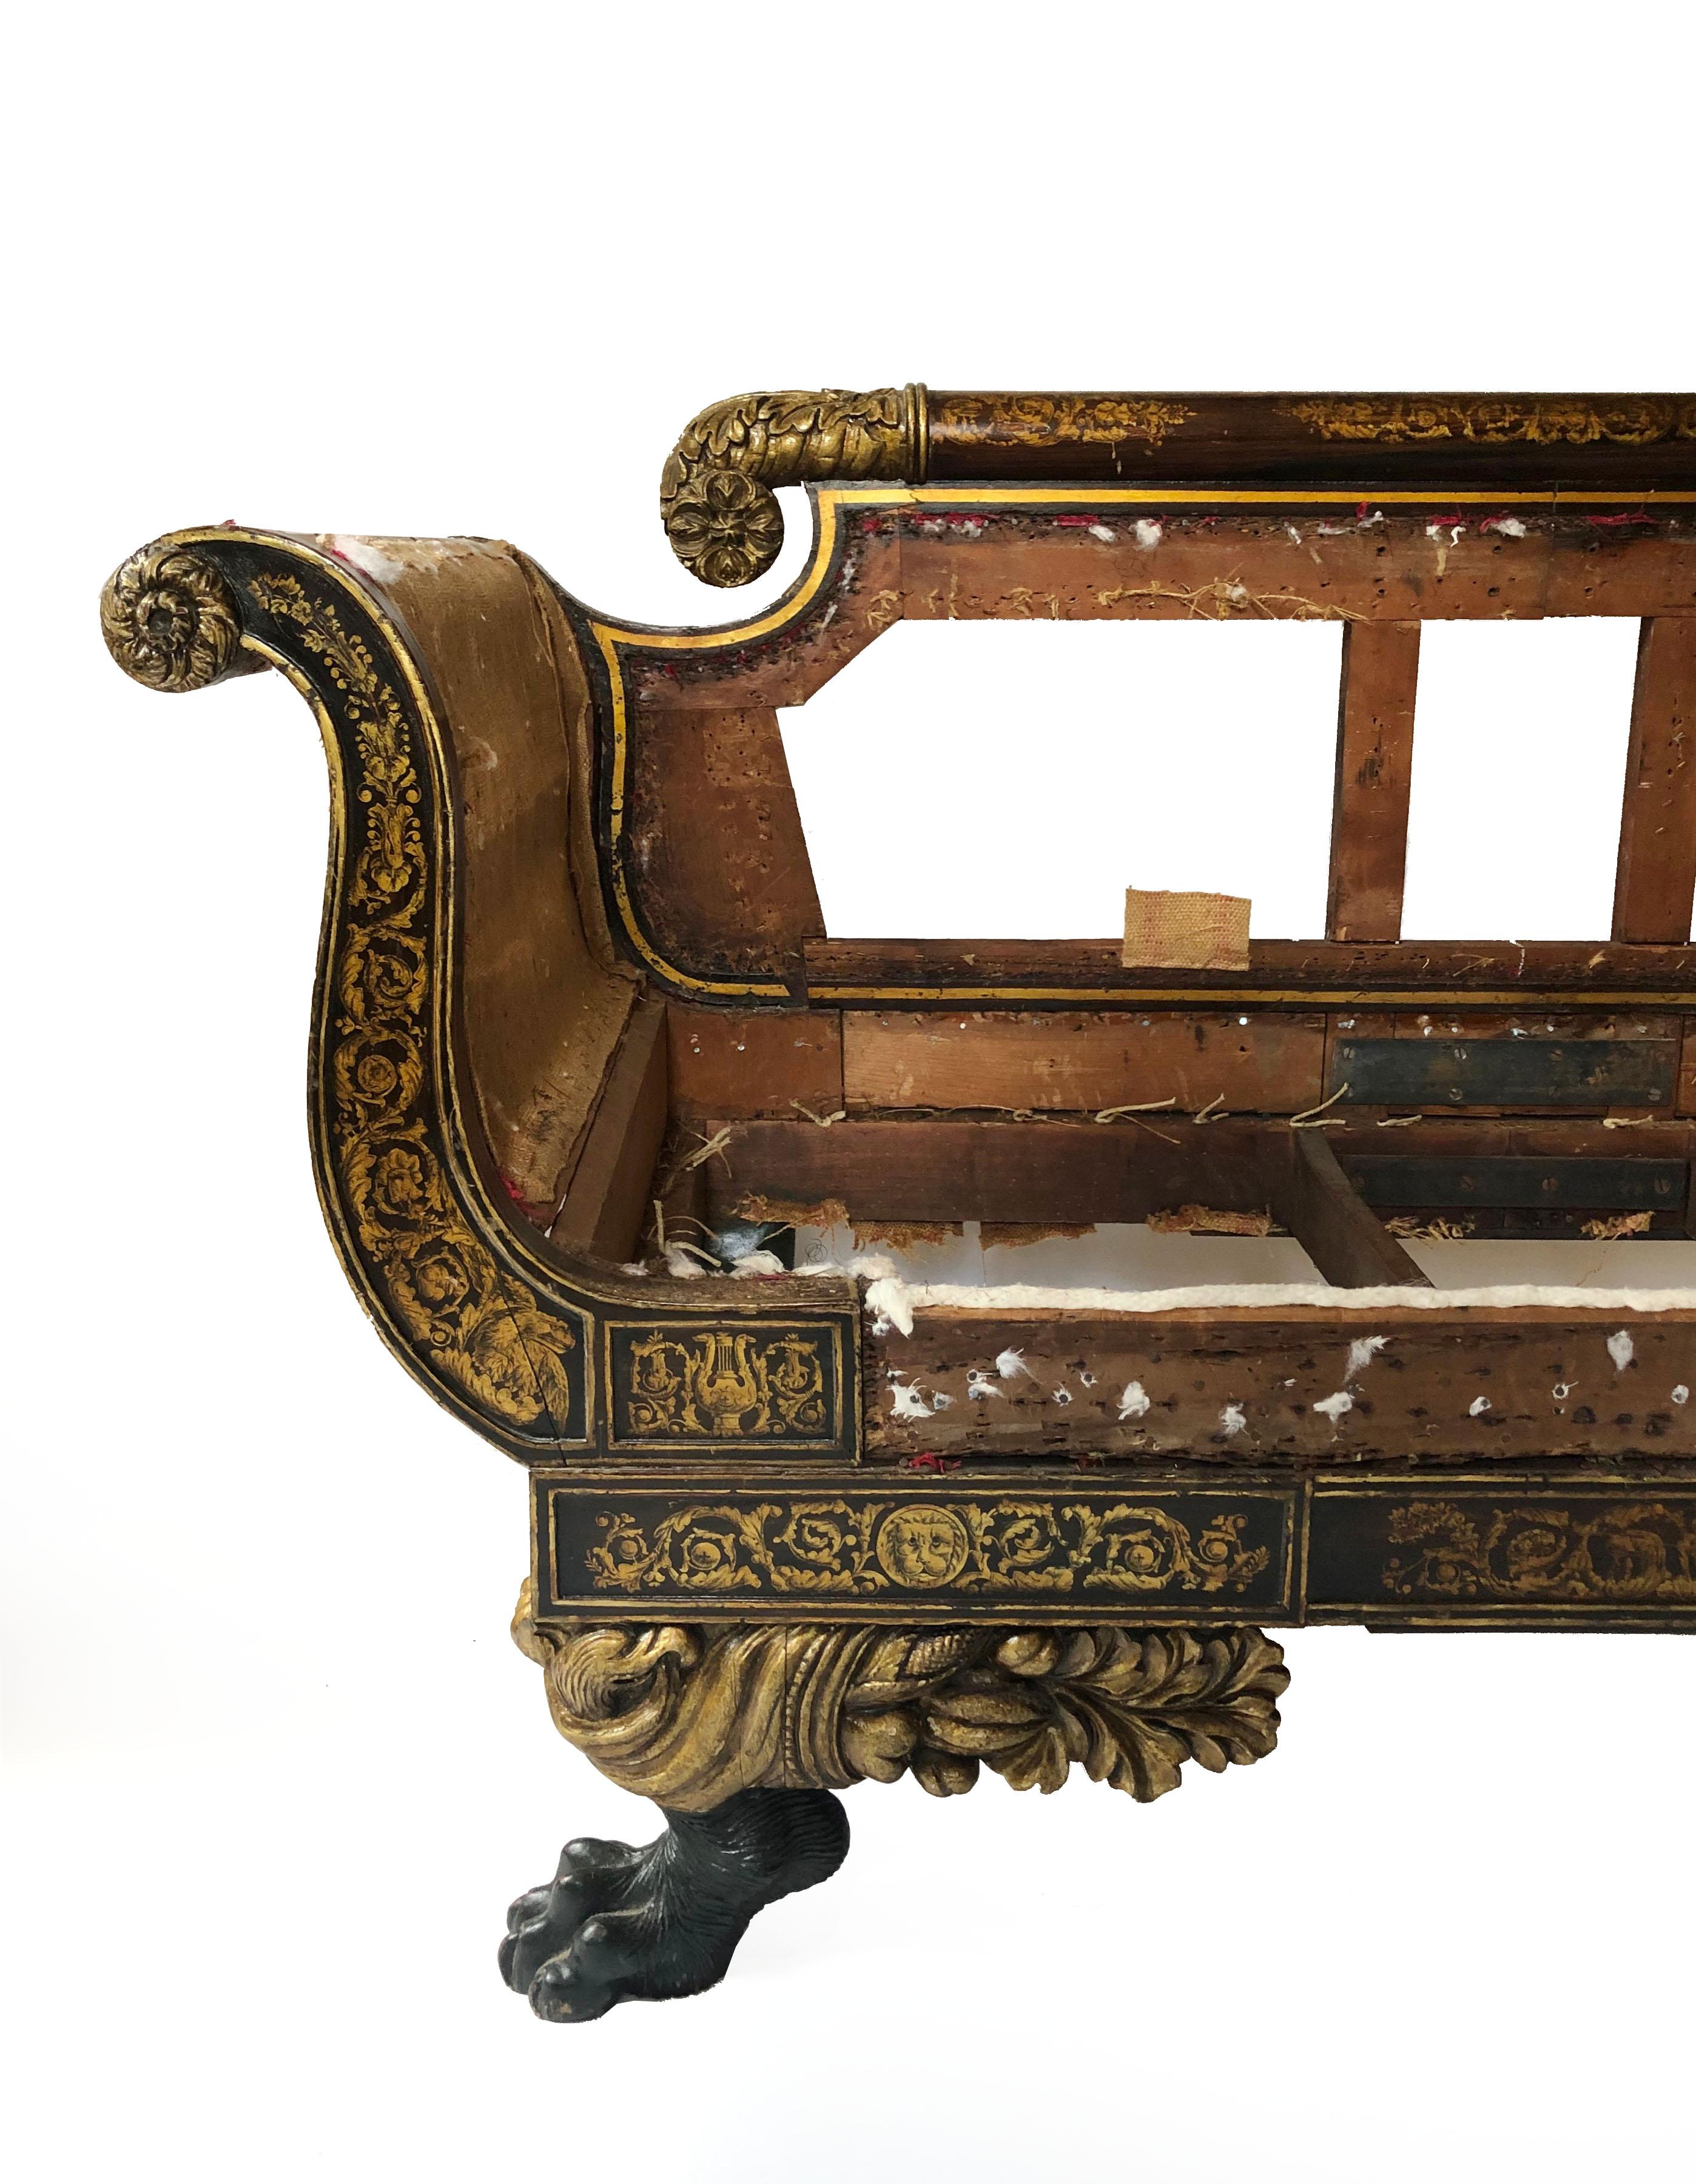 A spectacular New York City parcel-gilt sofa of the highest caliber design and proportions. The grain painted rosewood frame exhibits hand painted designs in gold of acanthus, honeysuckle, eagles, and lions. The carved feet exhibit an eagle's head,